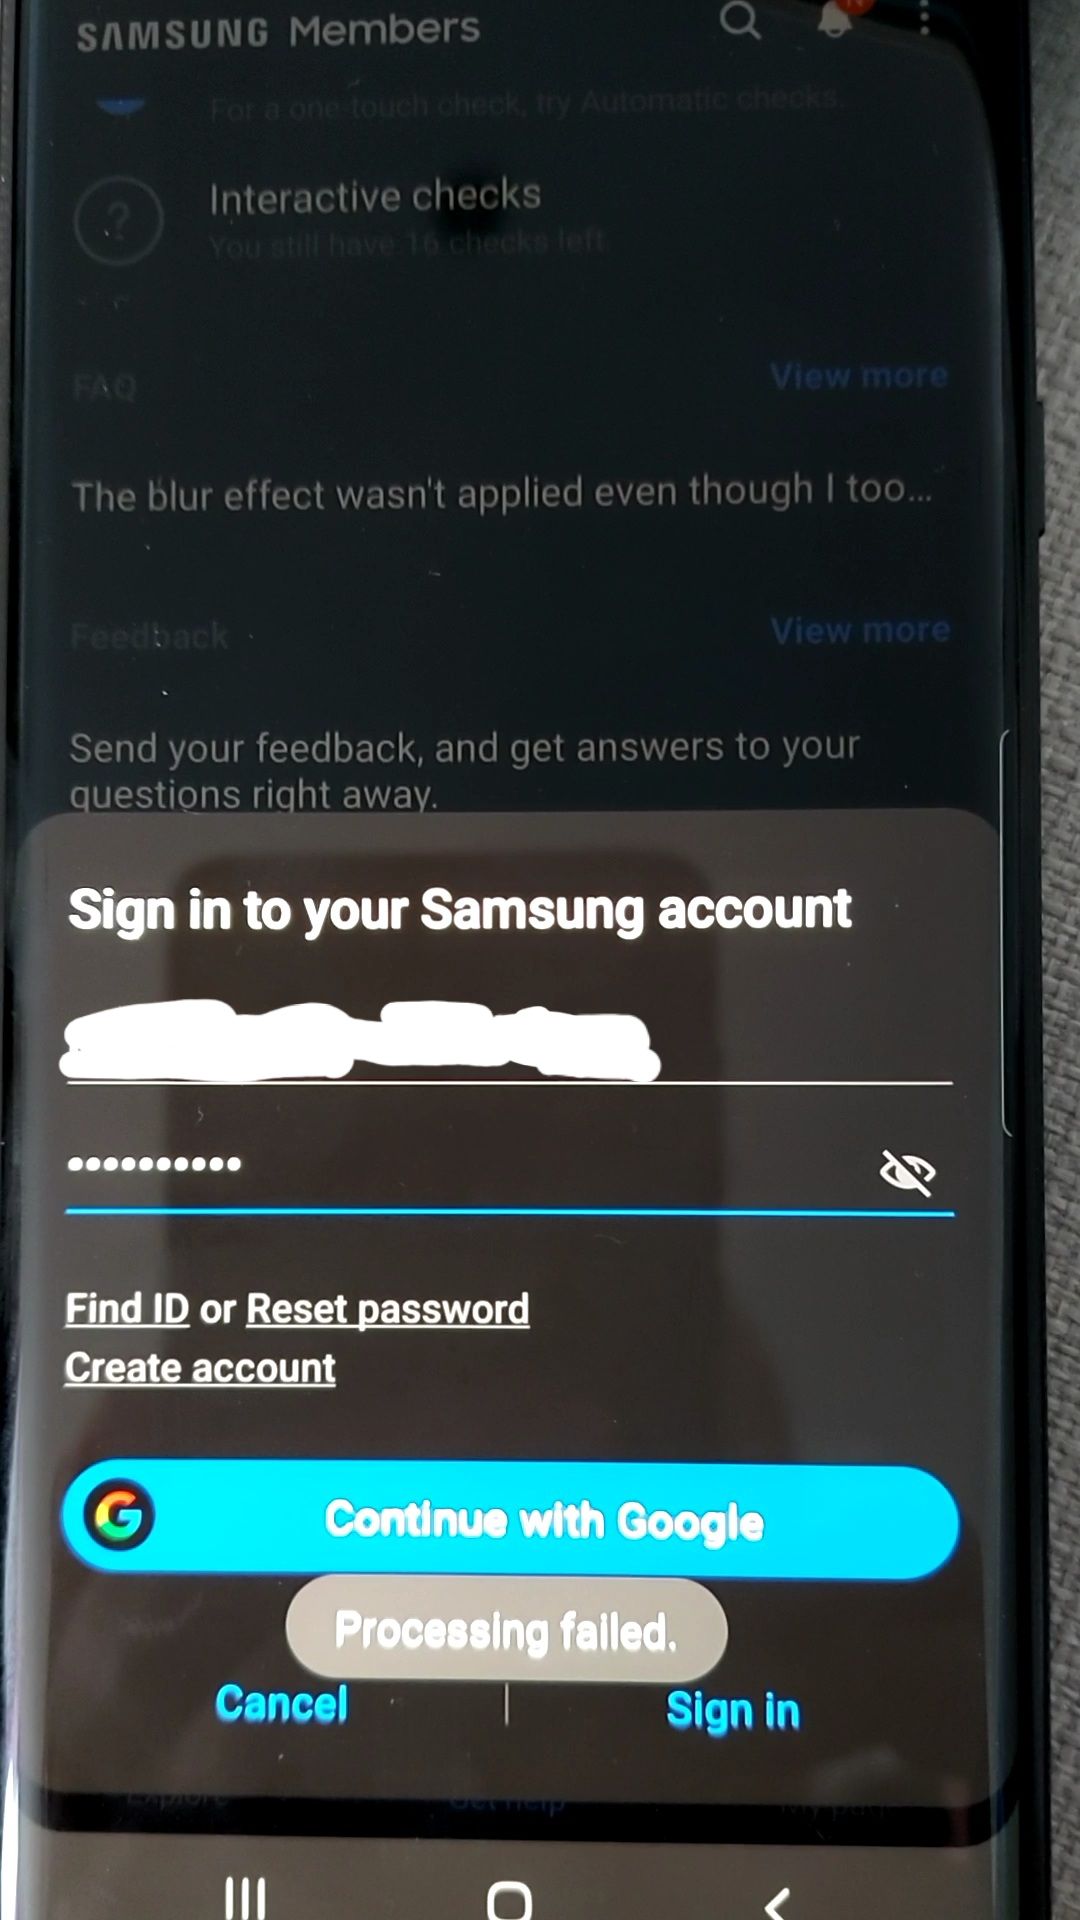 Hard reset - cannot sign back in to Samsung account - Samsung